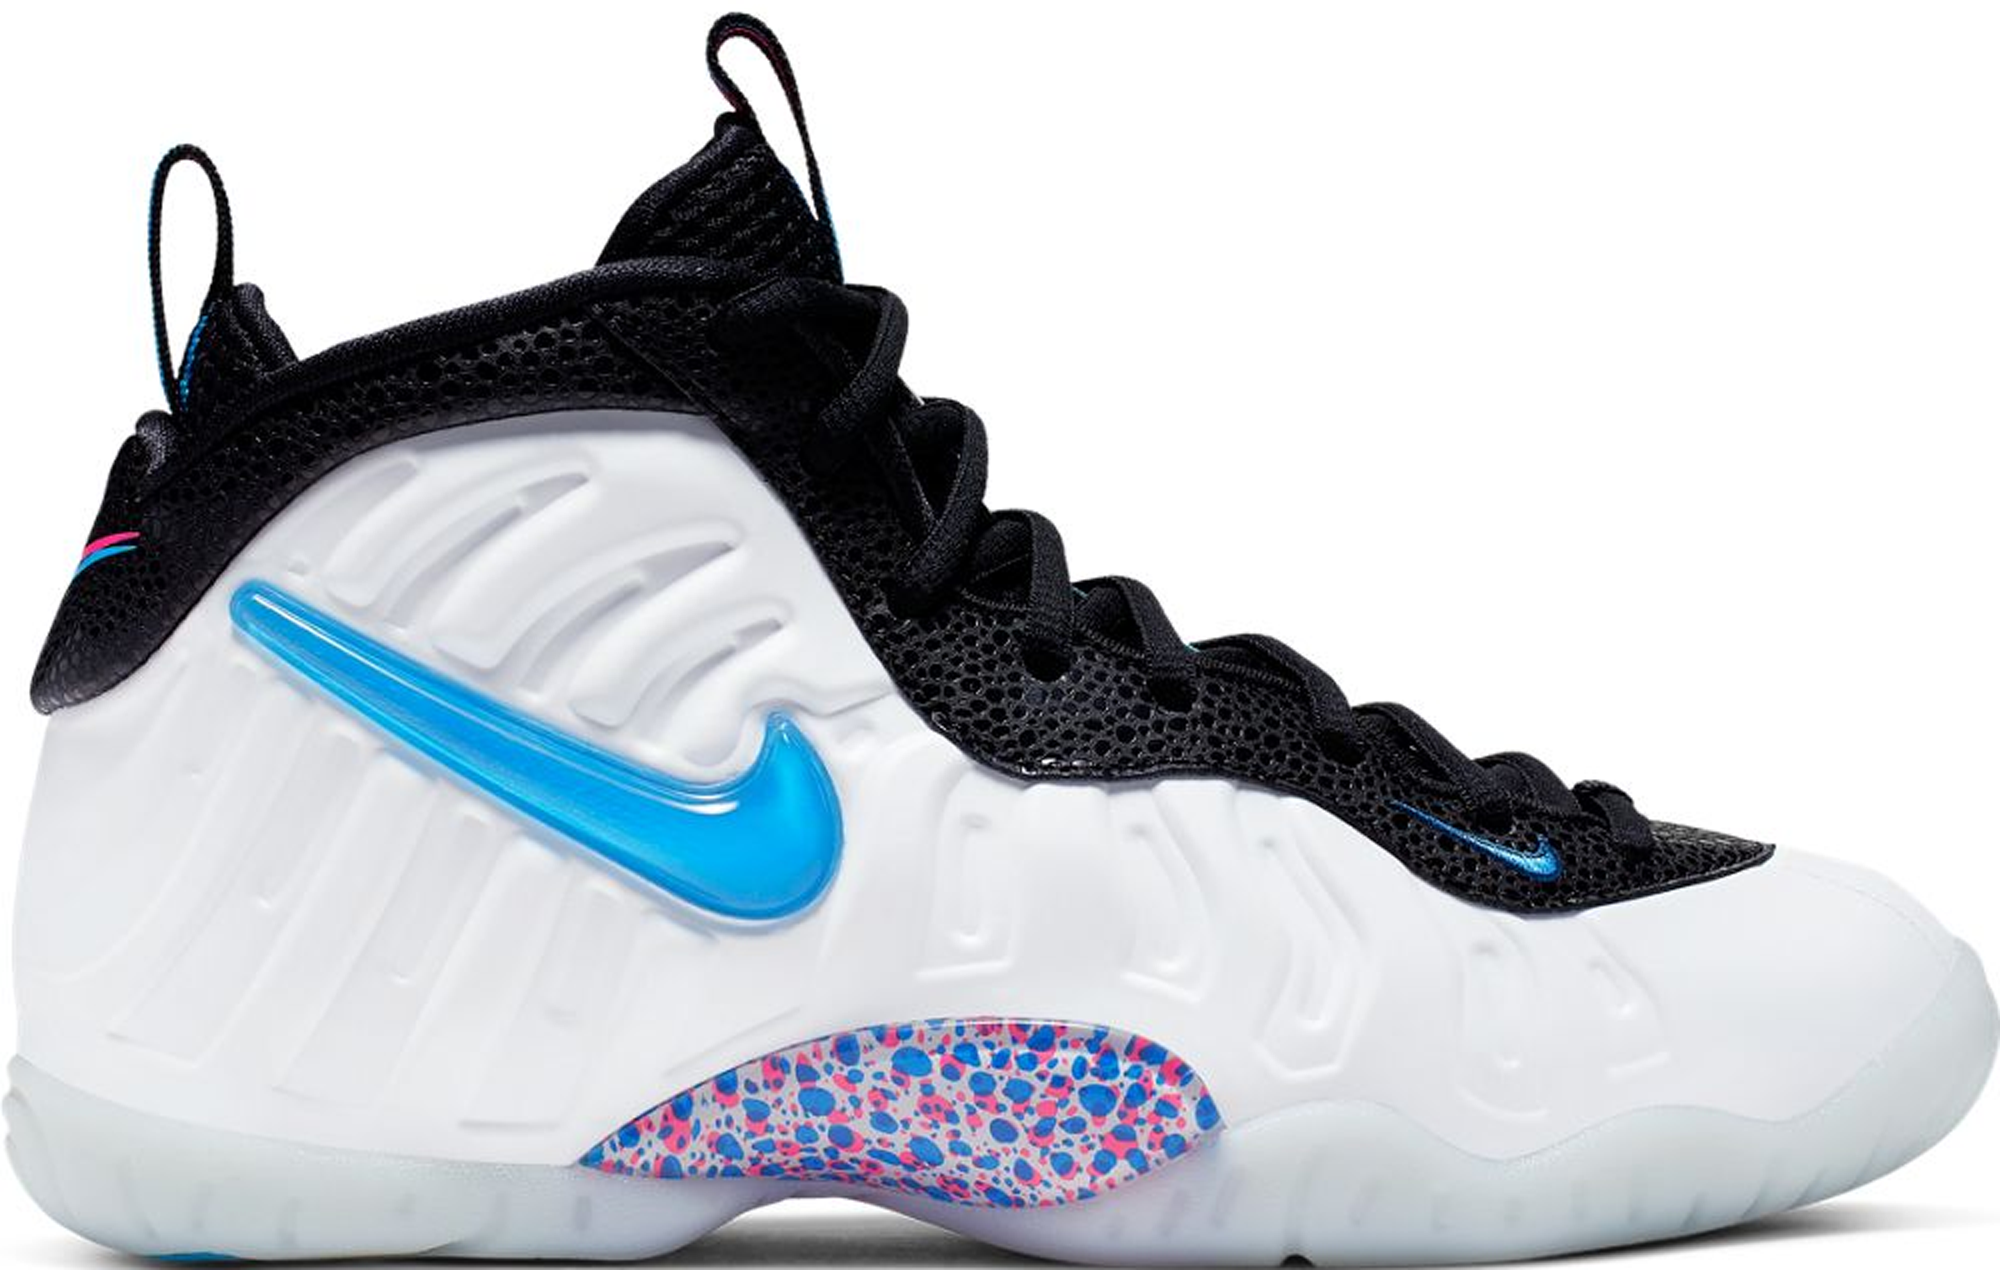 red white and blue foamposites